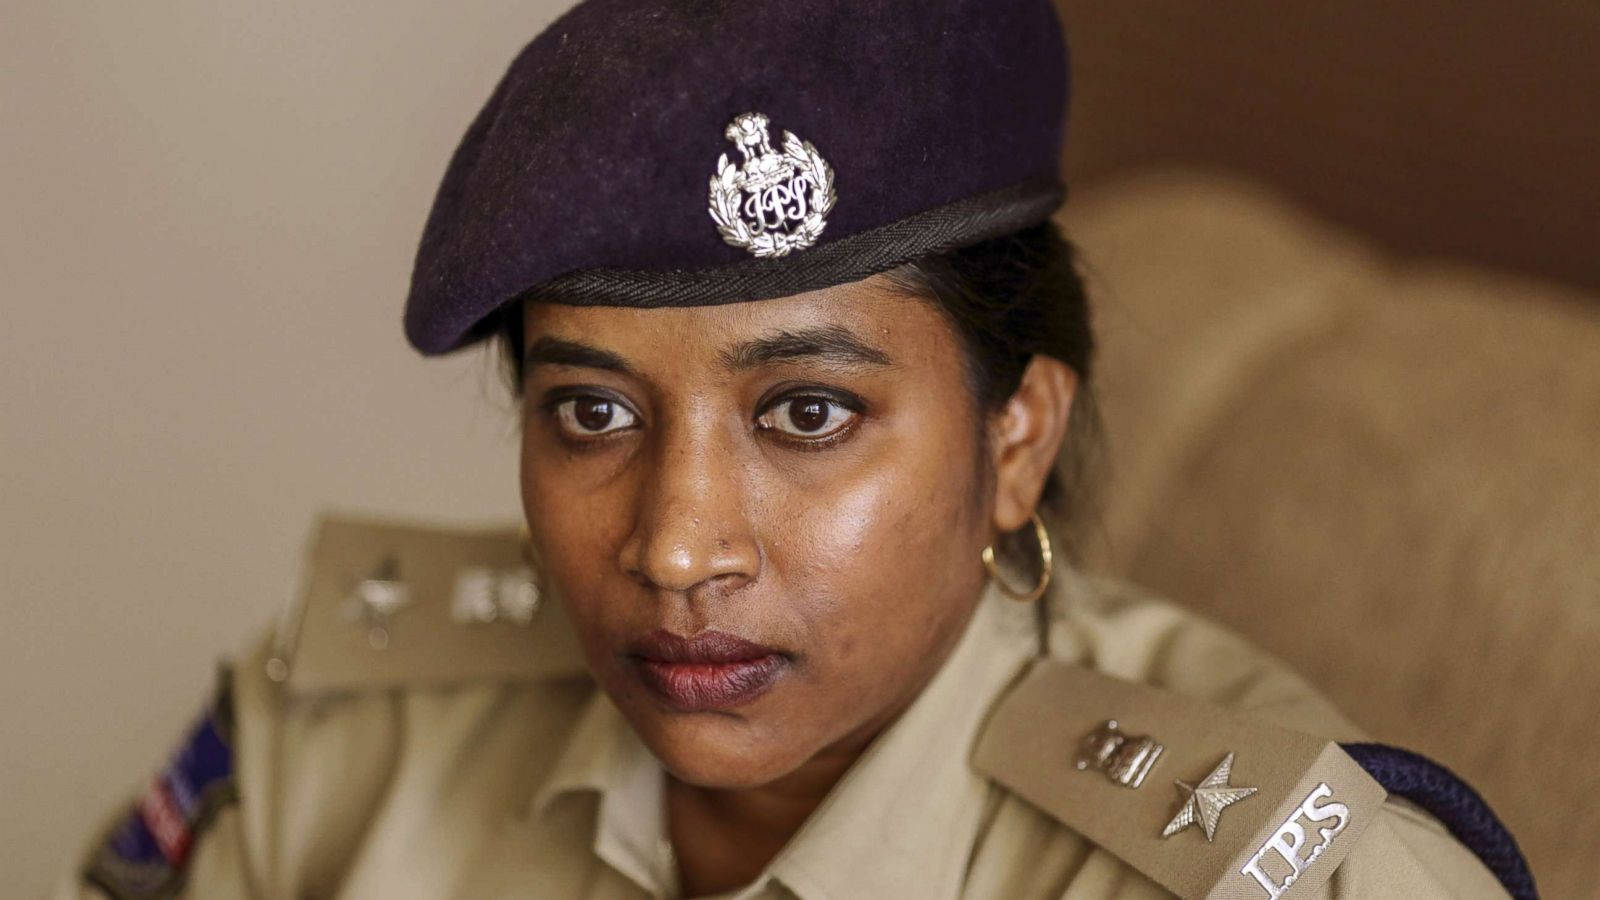 An Image Of A Female Officer Wearing A Cap With An Ips Logo. Wallpaper